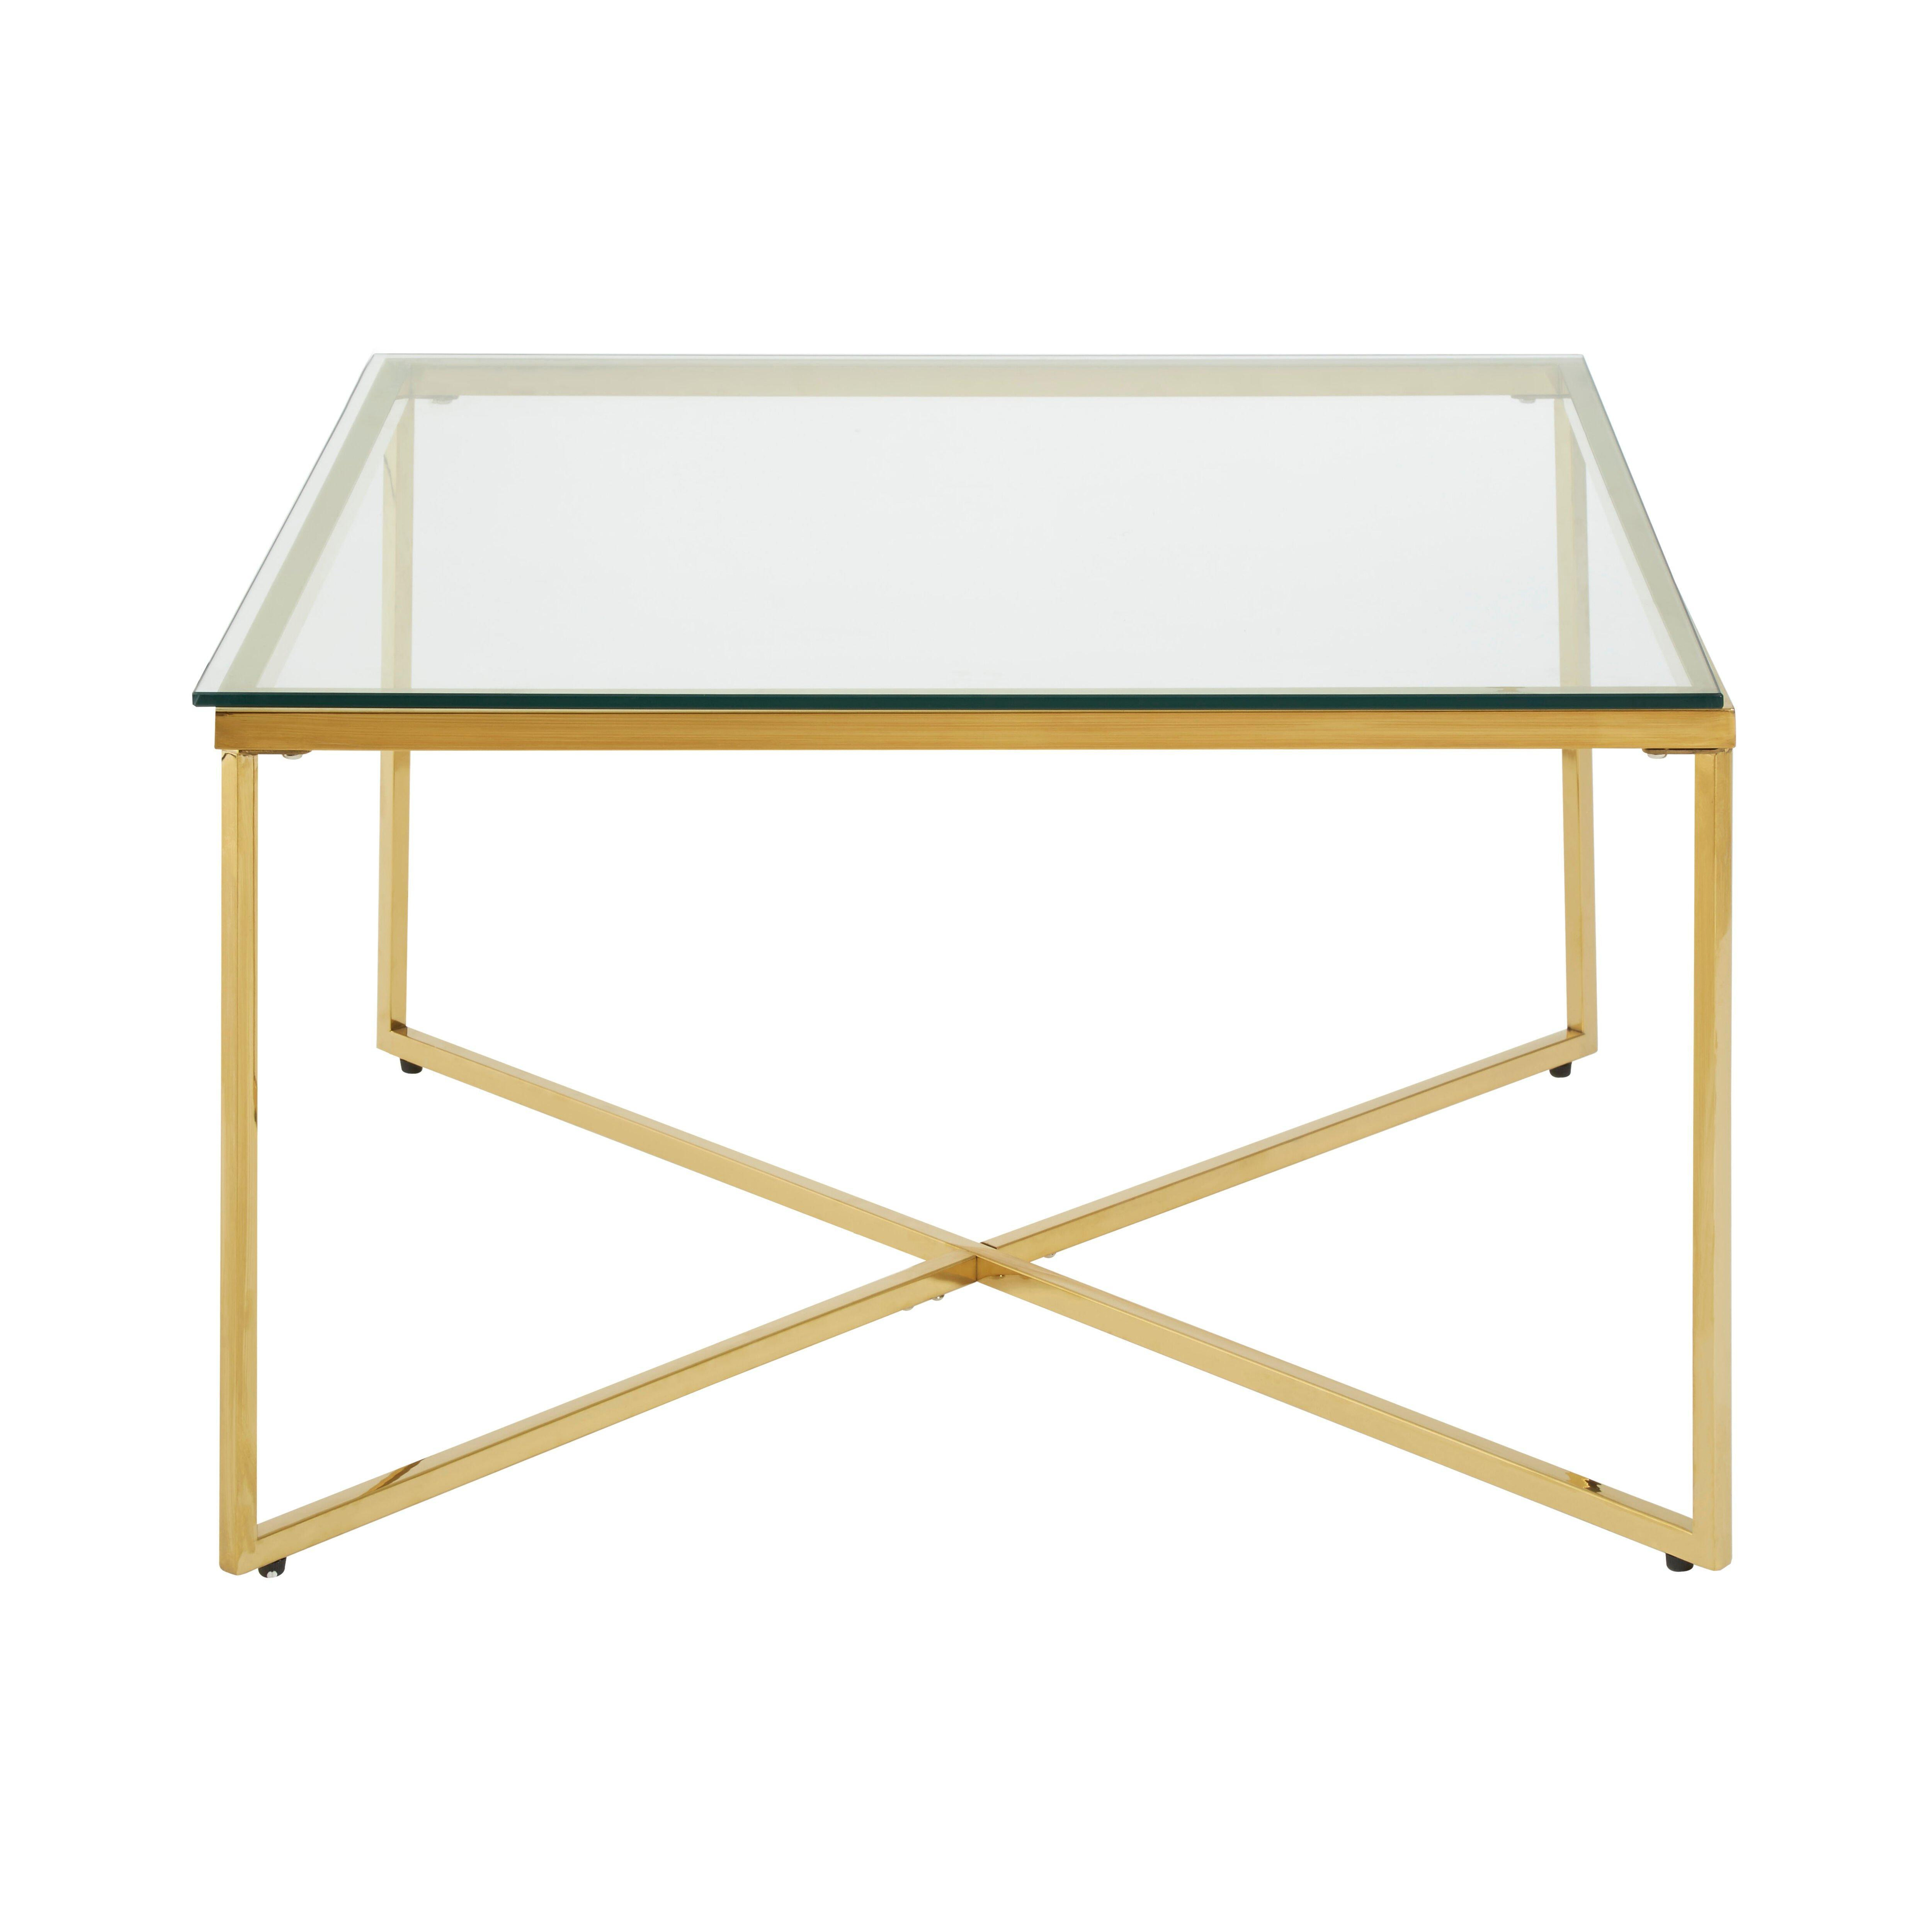 Contemporary Design Gold Finish Cross Base End Table, Versatile Side Table, Functional Table For Livingroom - image 1